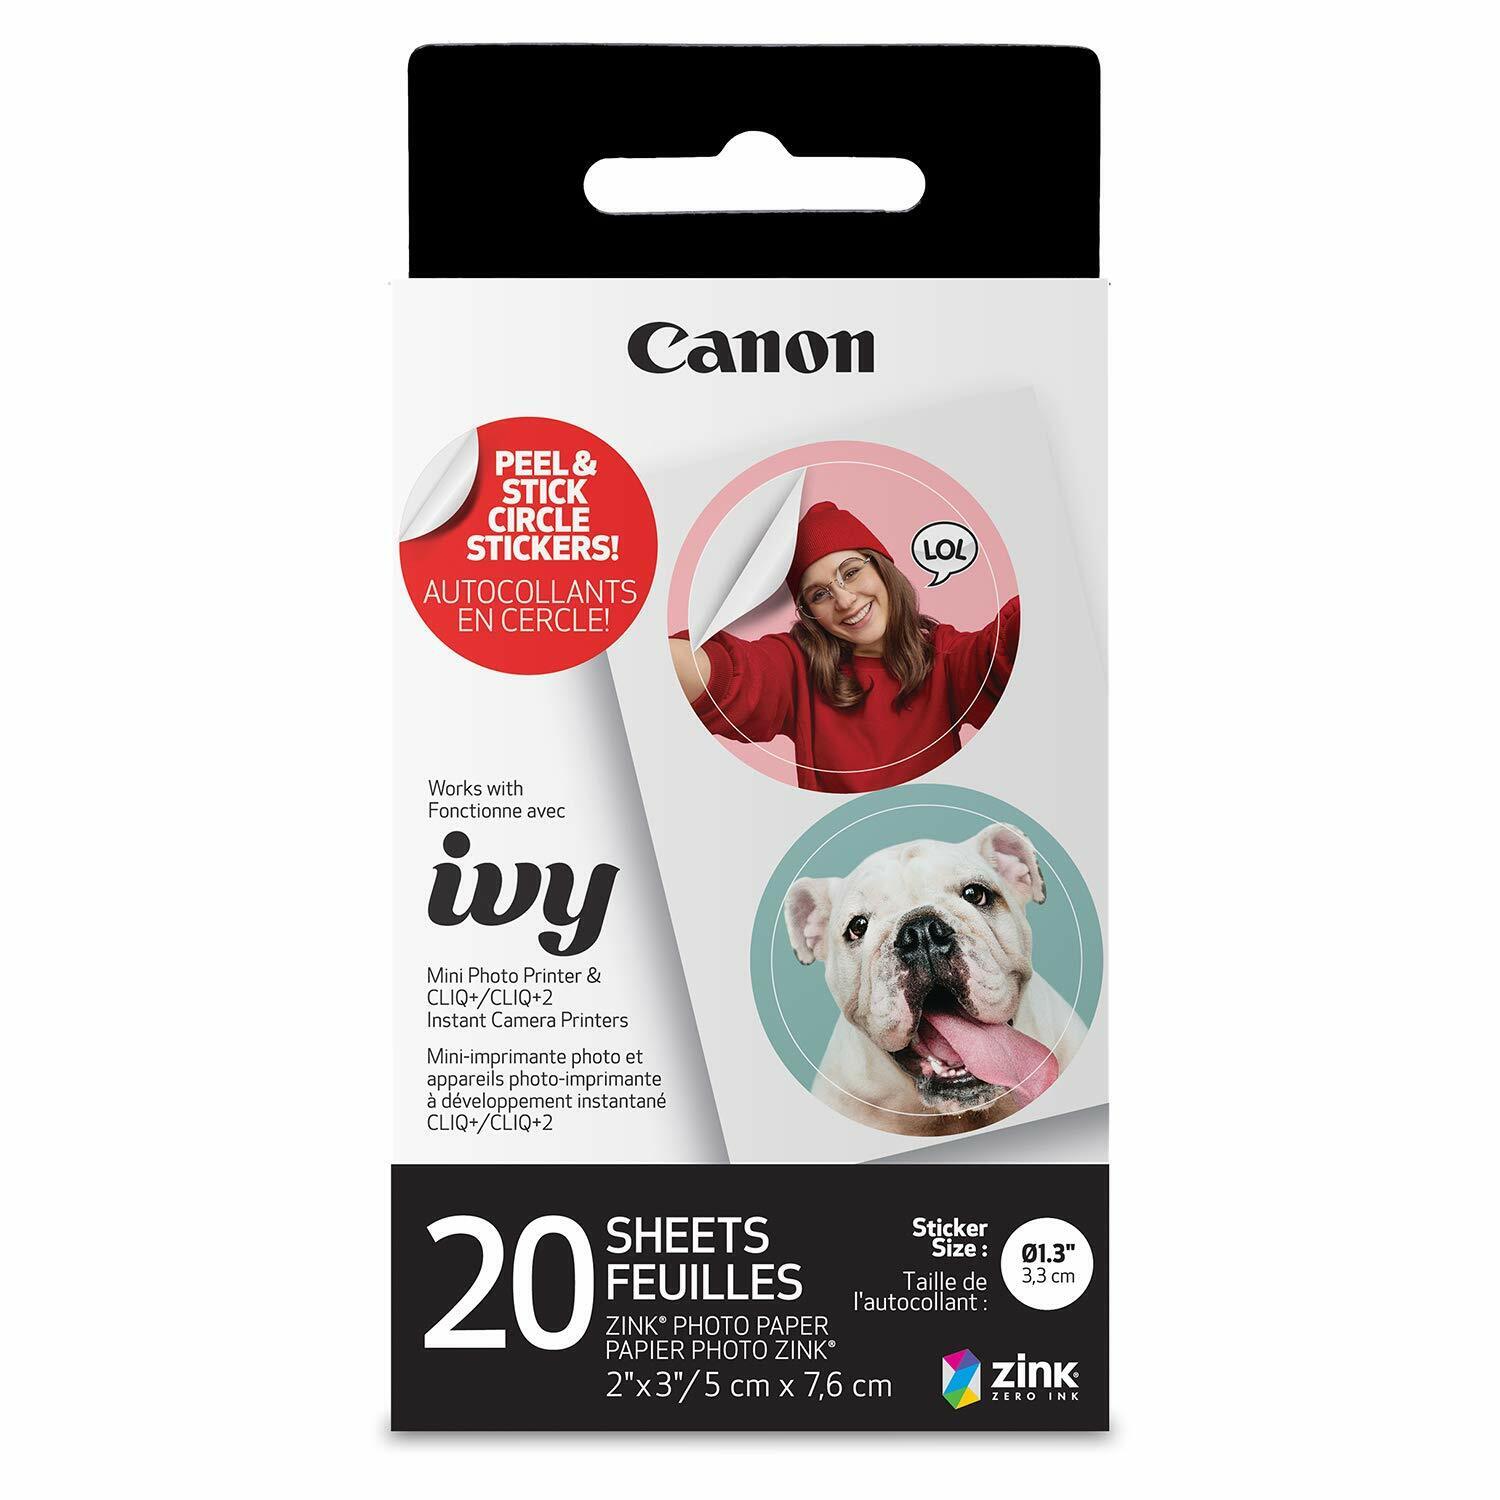 New Canon IVY ZINK Pre-Cut Circle Sticker Paper, 20 Sheets